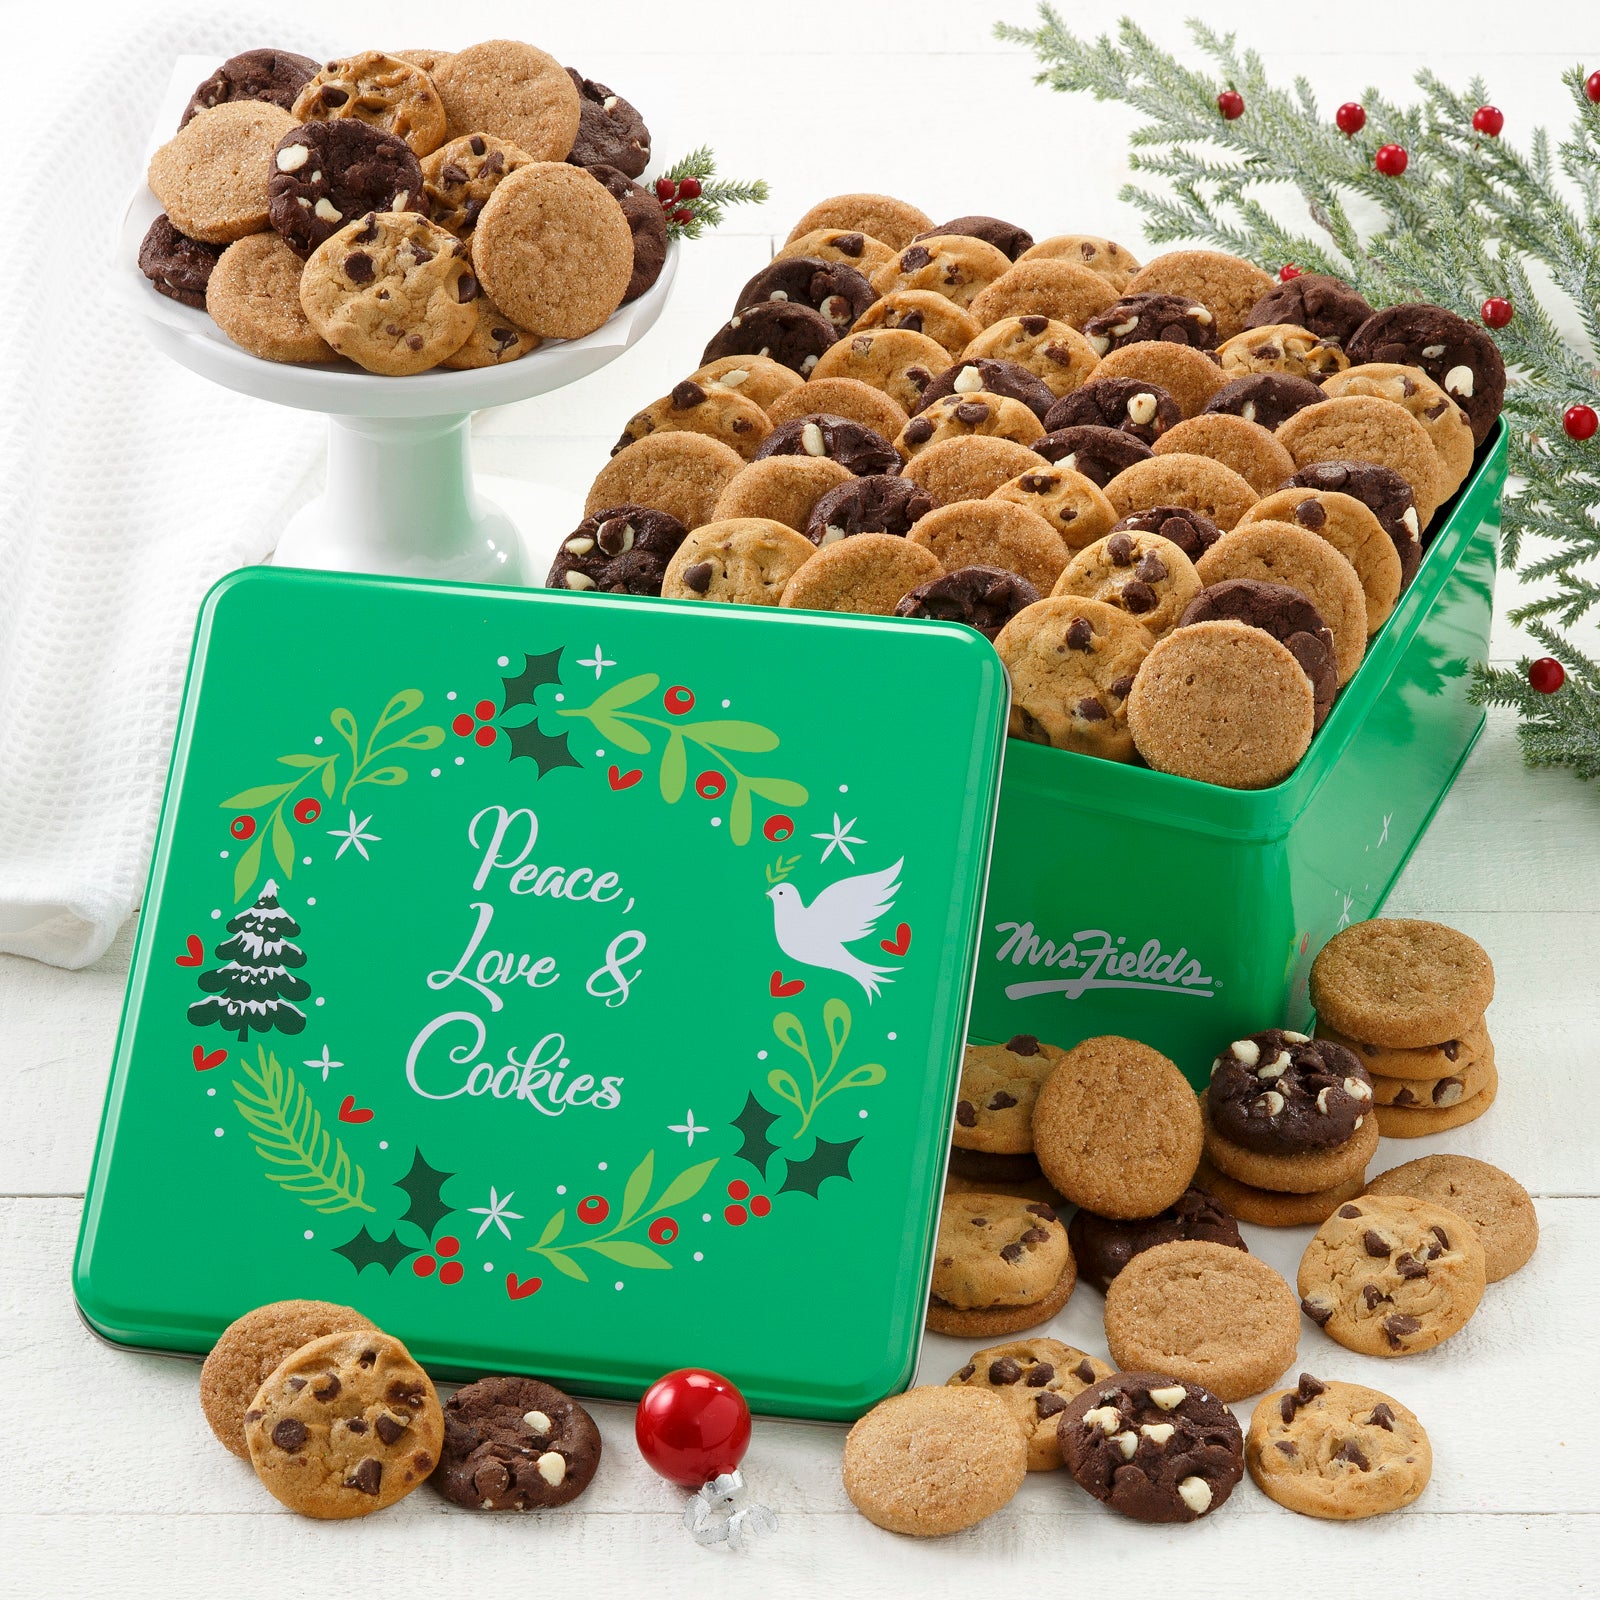 Green Peace, Love, & Cookies tin decorated with a holiday wreath and filled with an assortment of no-nut Nibblers®